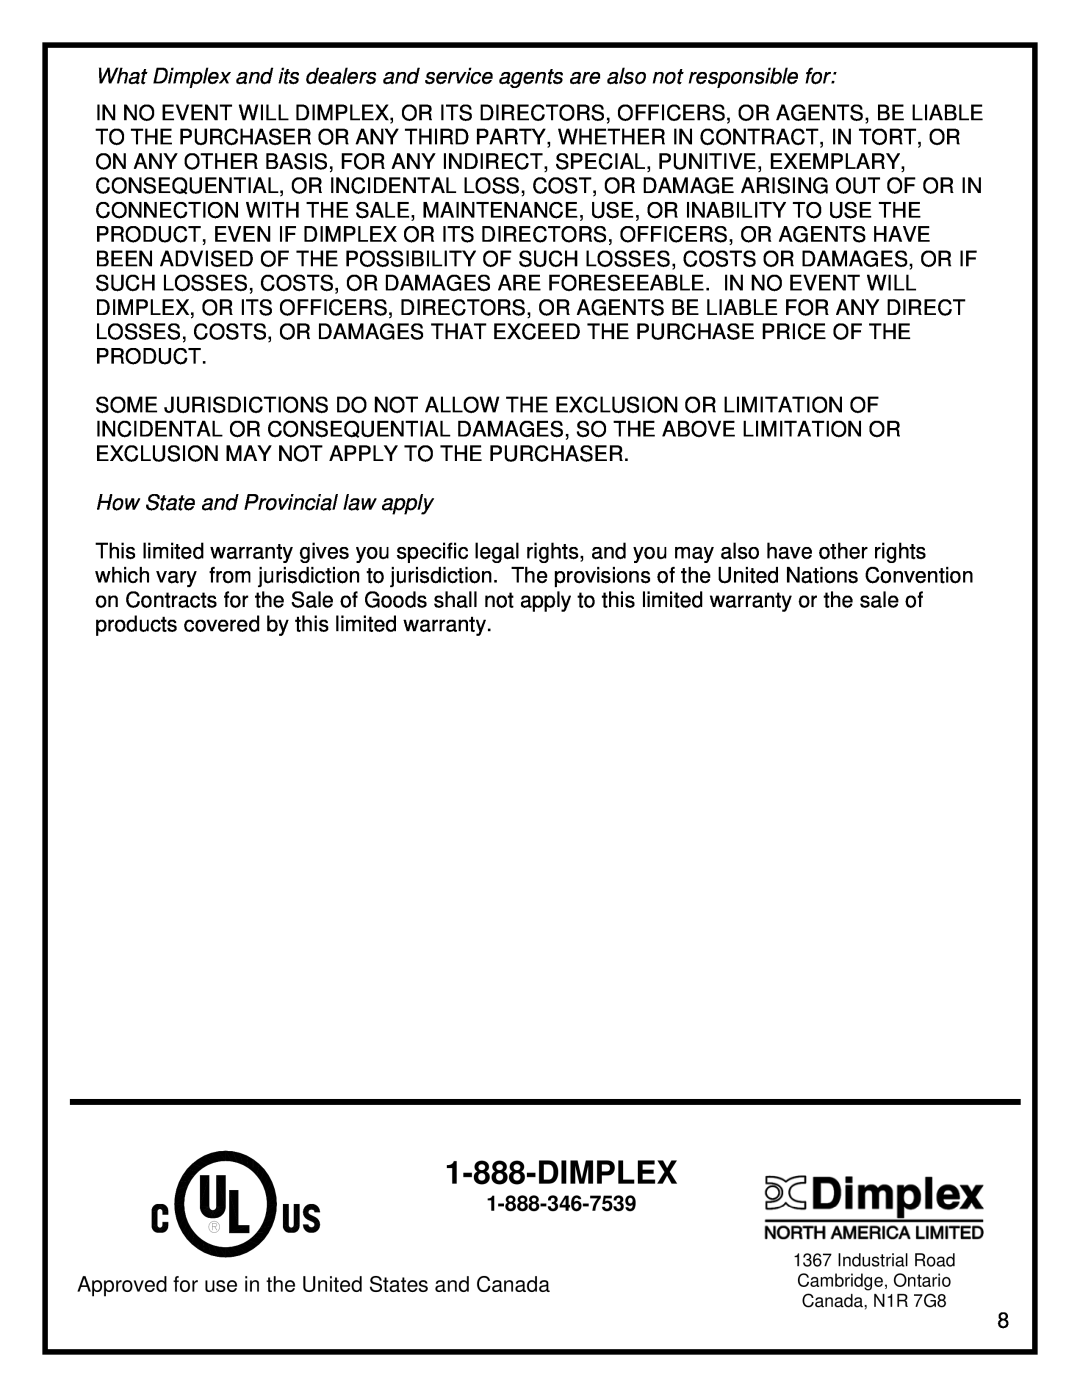 Dimplex milano-ef manual Dimplex, How State and Provincial law apply 